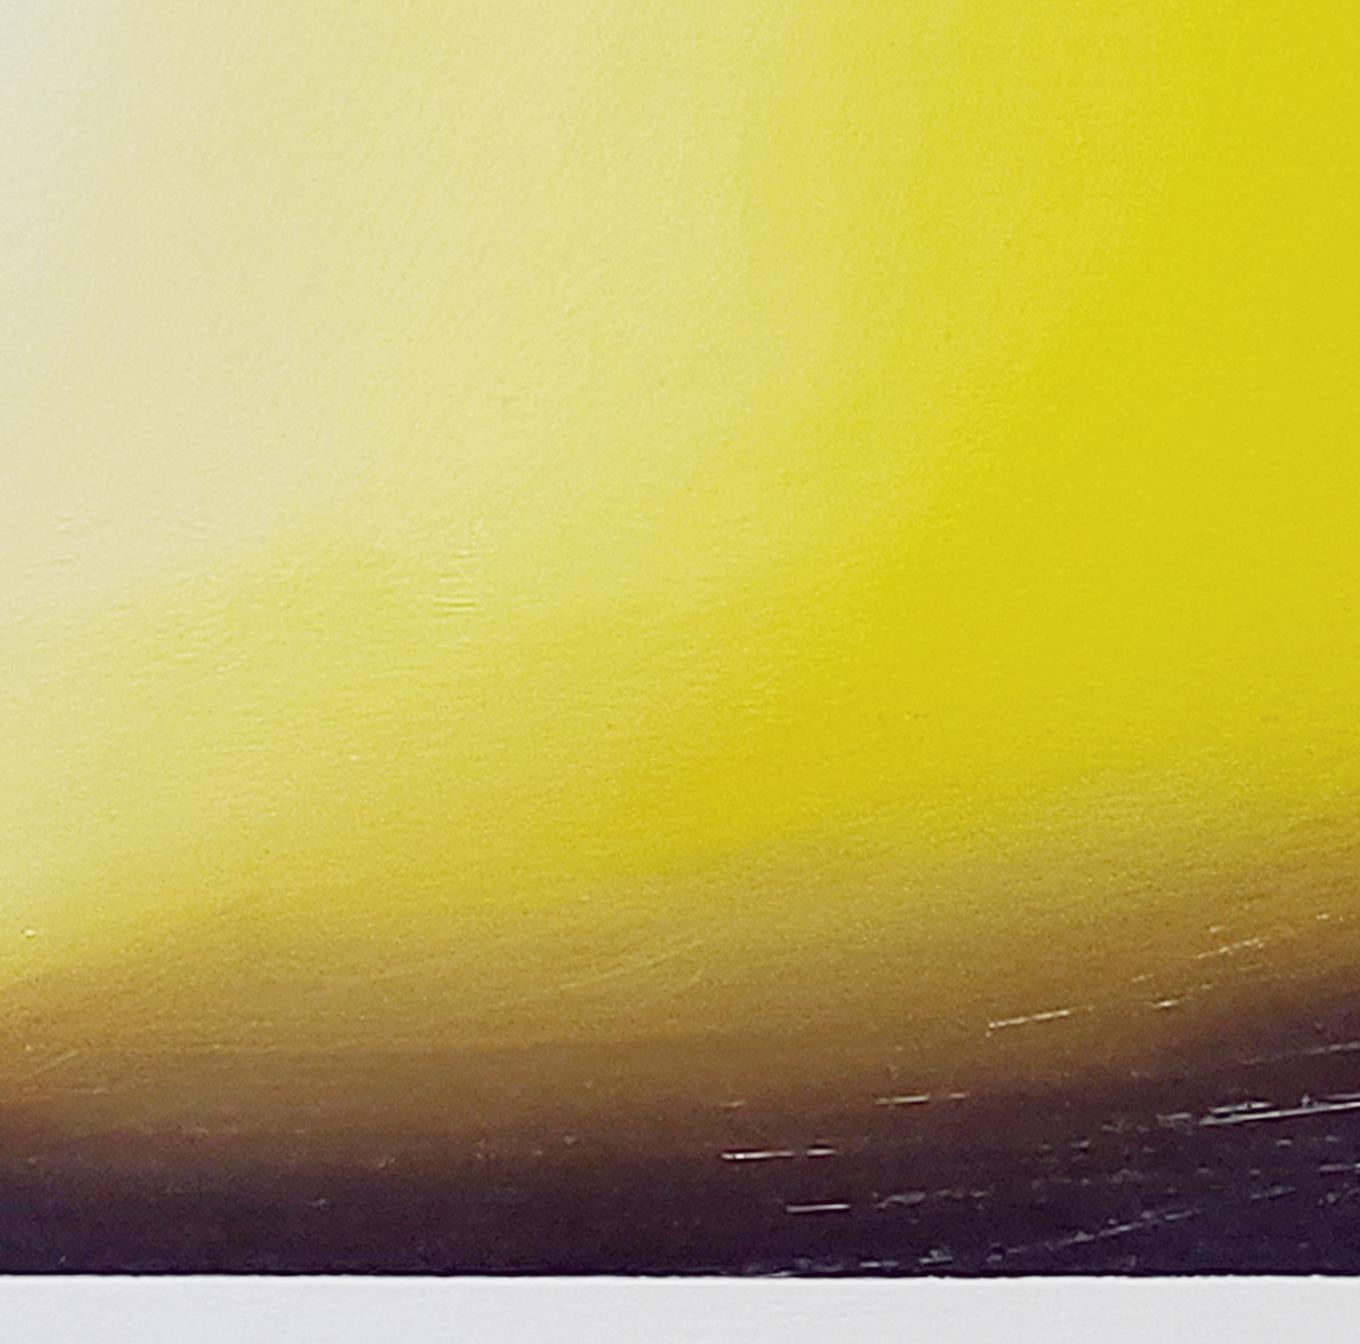 Herramienta en Amarillo. From The Composition with Tools series - Abstract Painting by Jose Ricardo Contreras Gonzalez